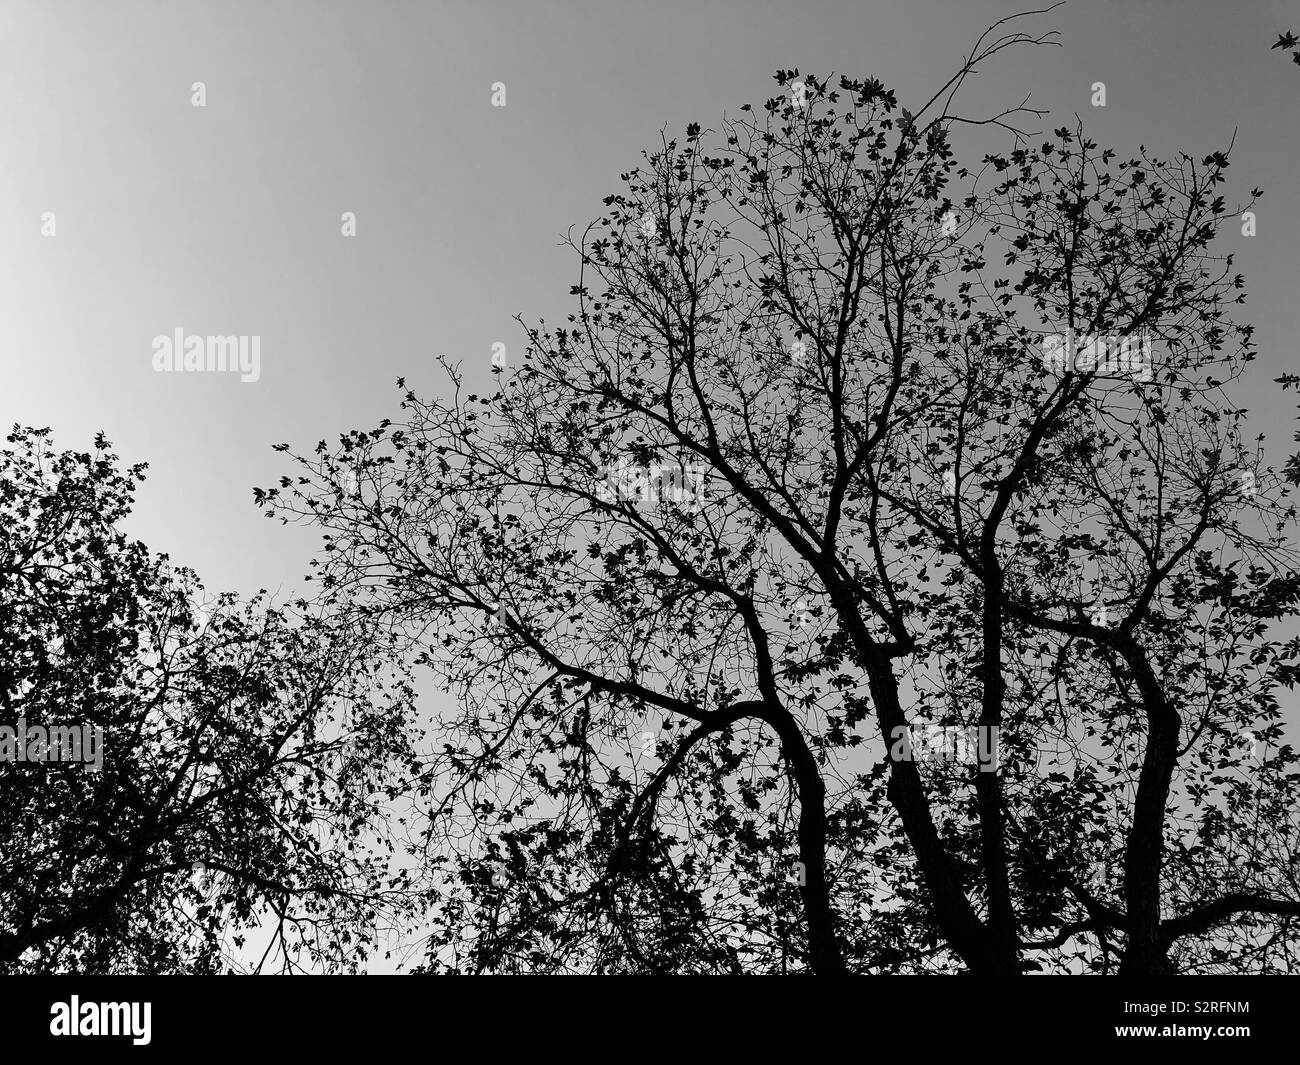 Tree branches in silhouette Stock Photo